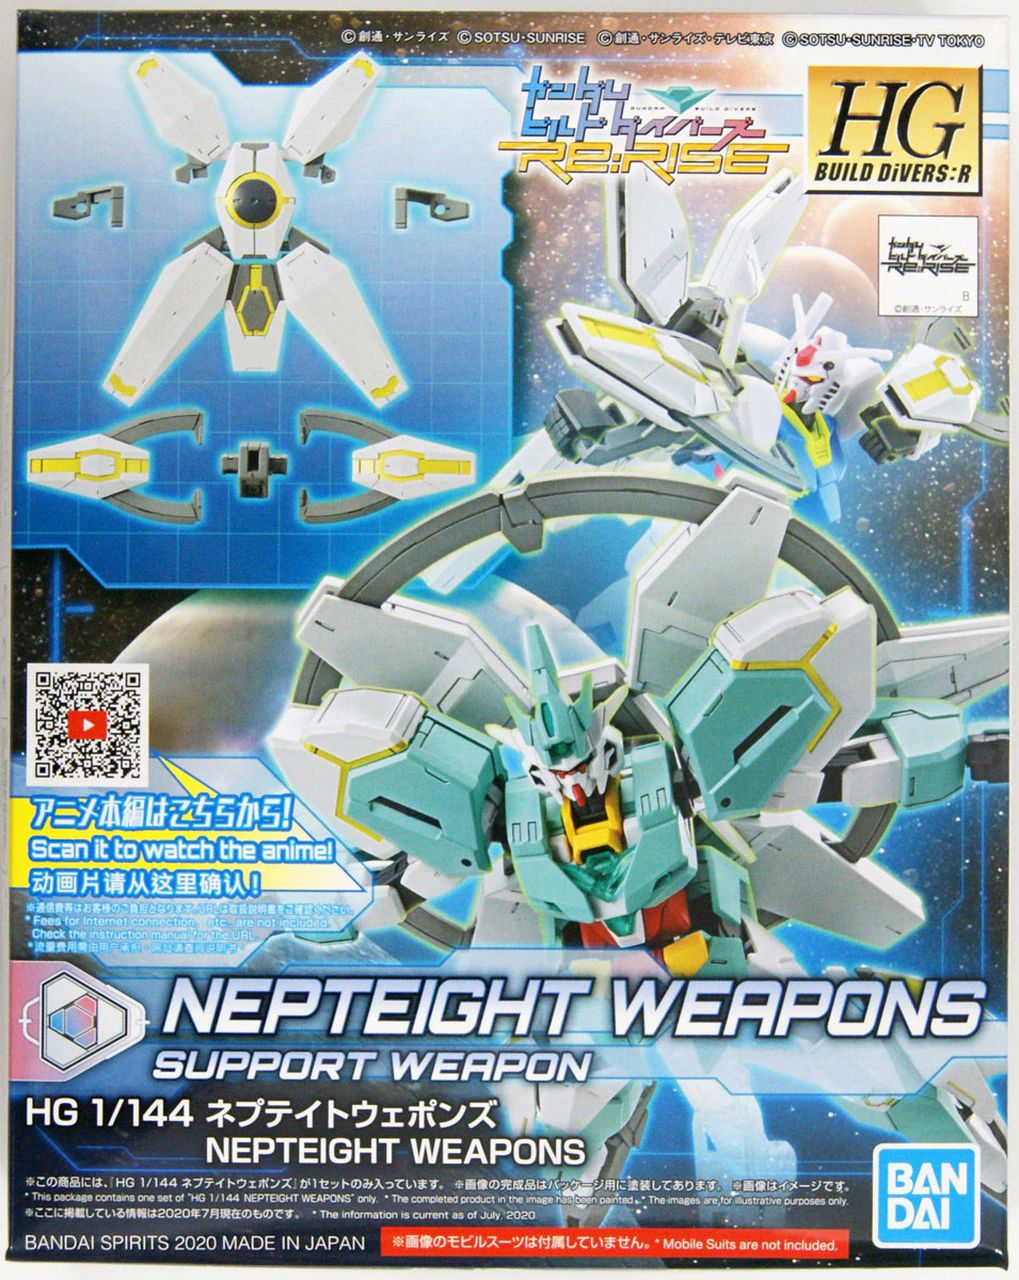 HG 1/144 Nepteight Weapons